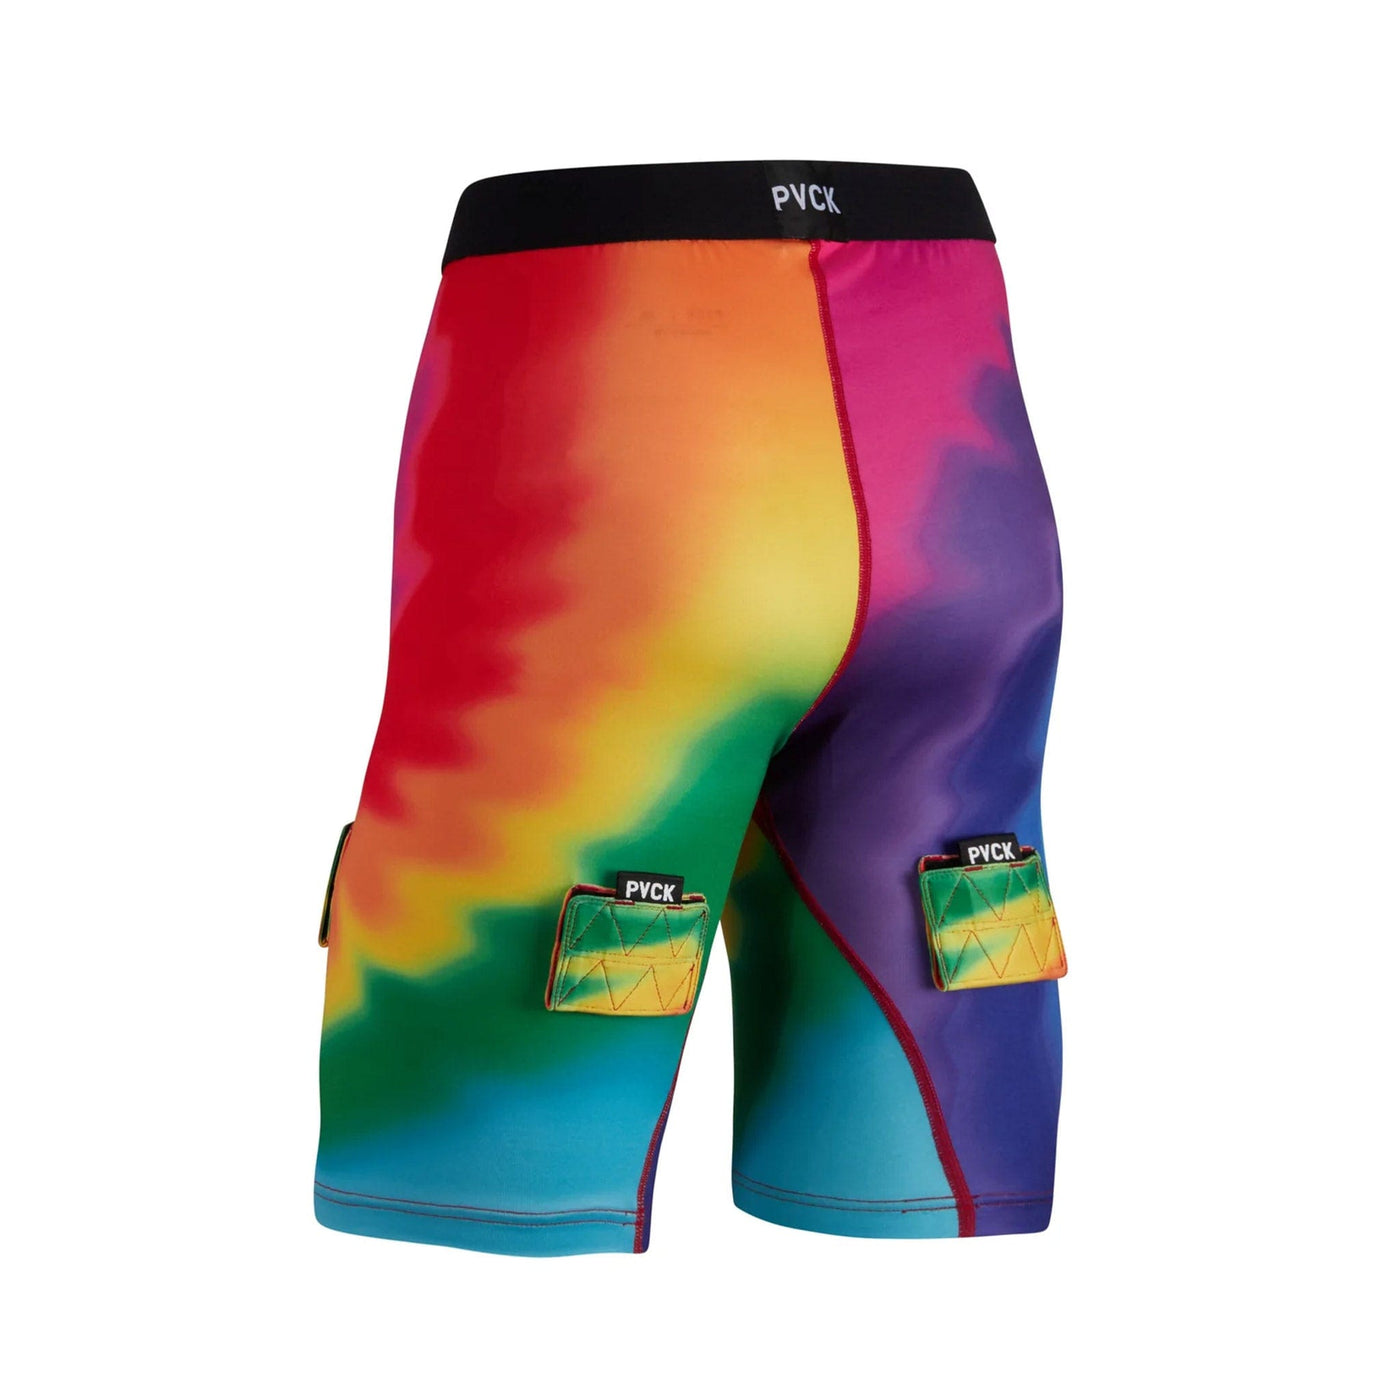 PVCK Womens Compression Jill Shorts - Tie Dye - The Hockey Shop Source For Sports